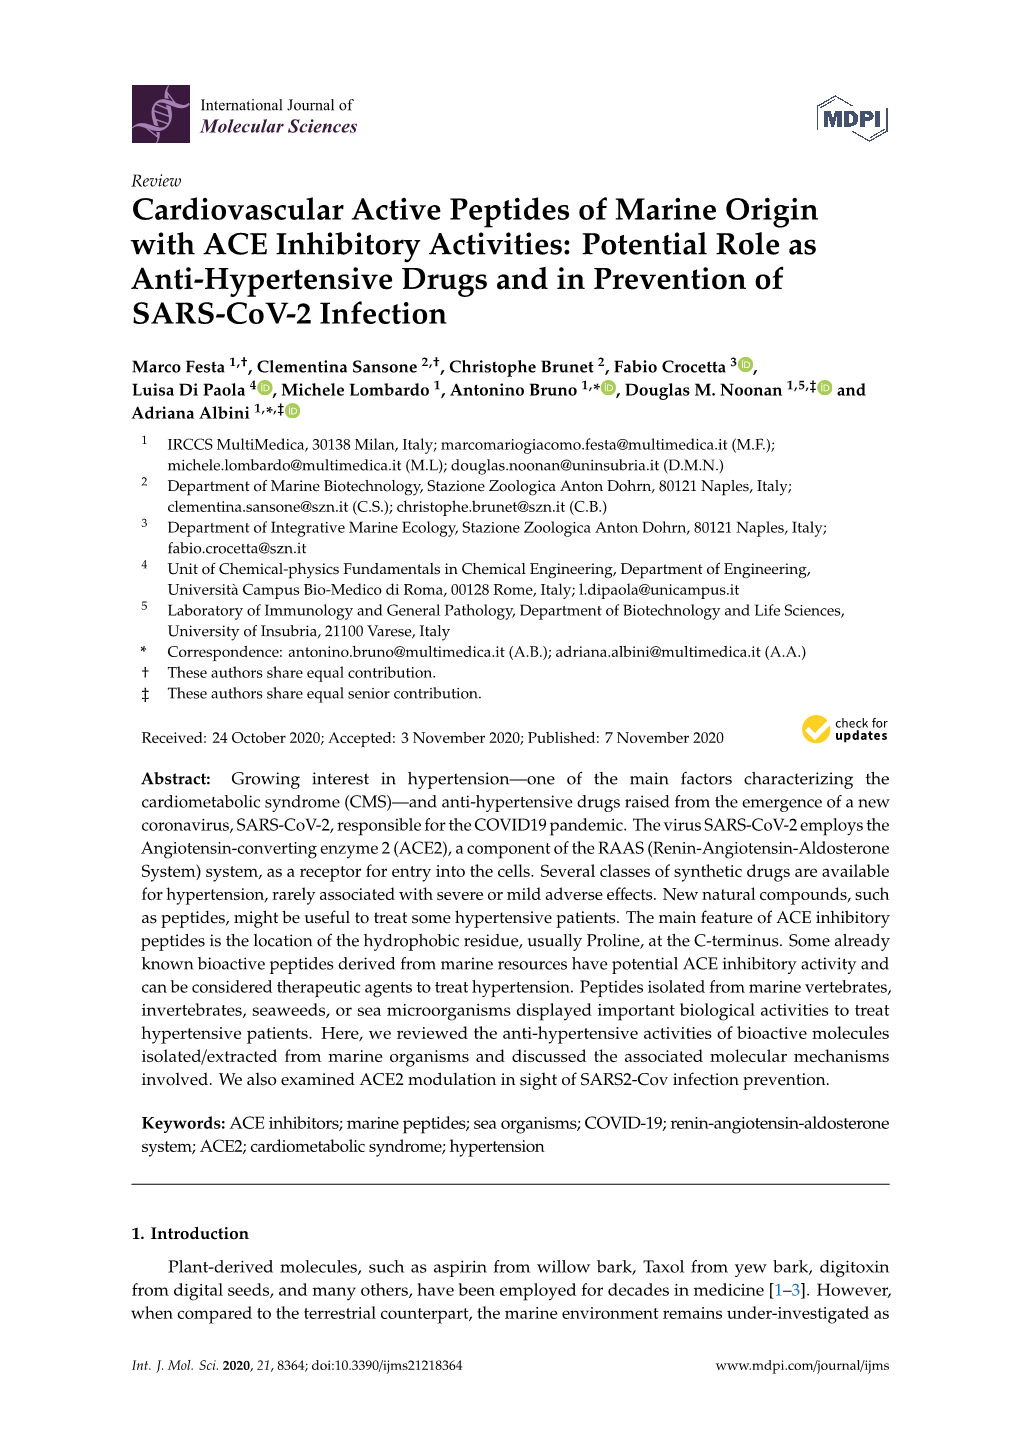 Cardiovascular Active Peptides of Marine Origin with ACE Inhibitory Activities: Potential Role As Anti-Hypertensive Drugs and in Prevention of SARS-Cov-2 Infection